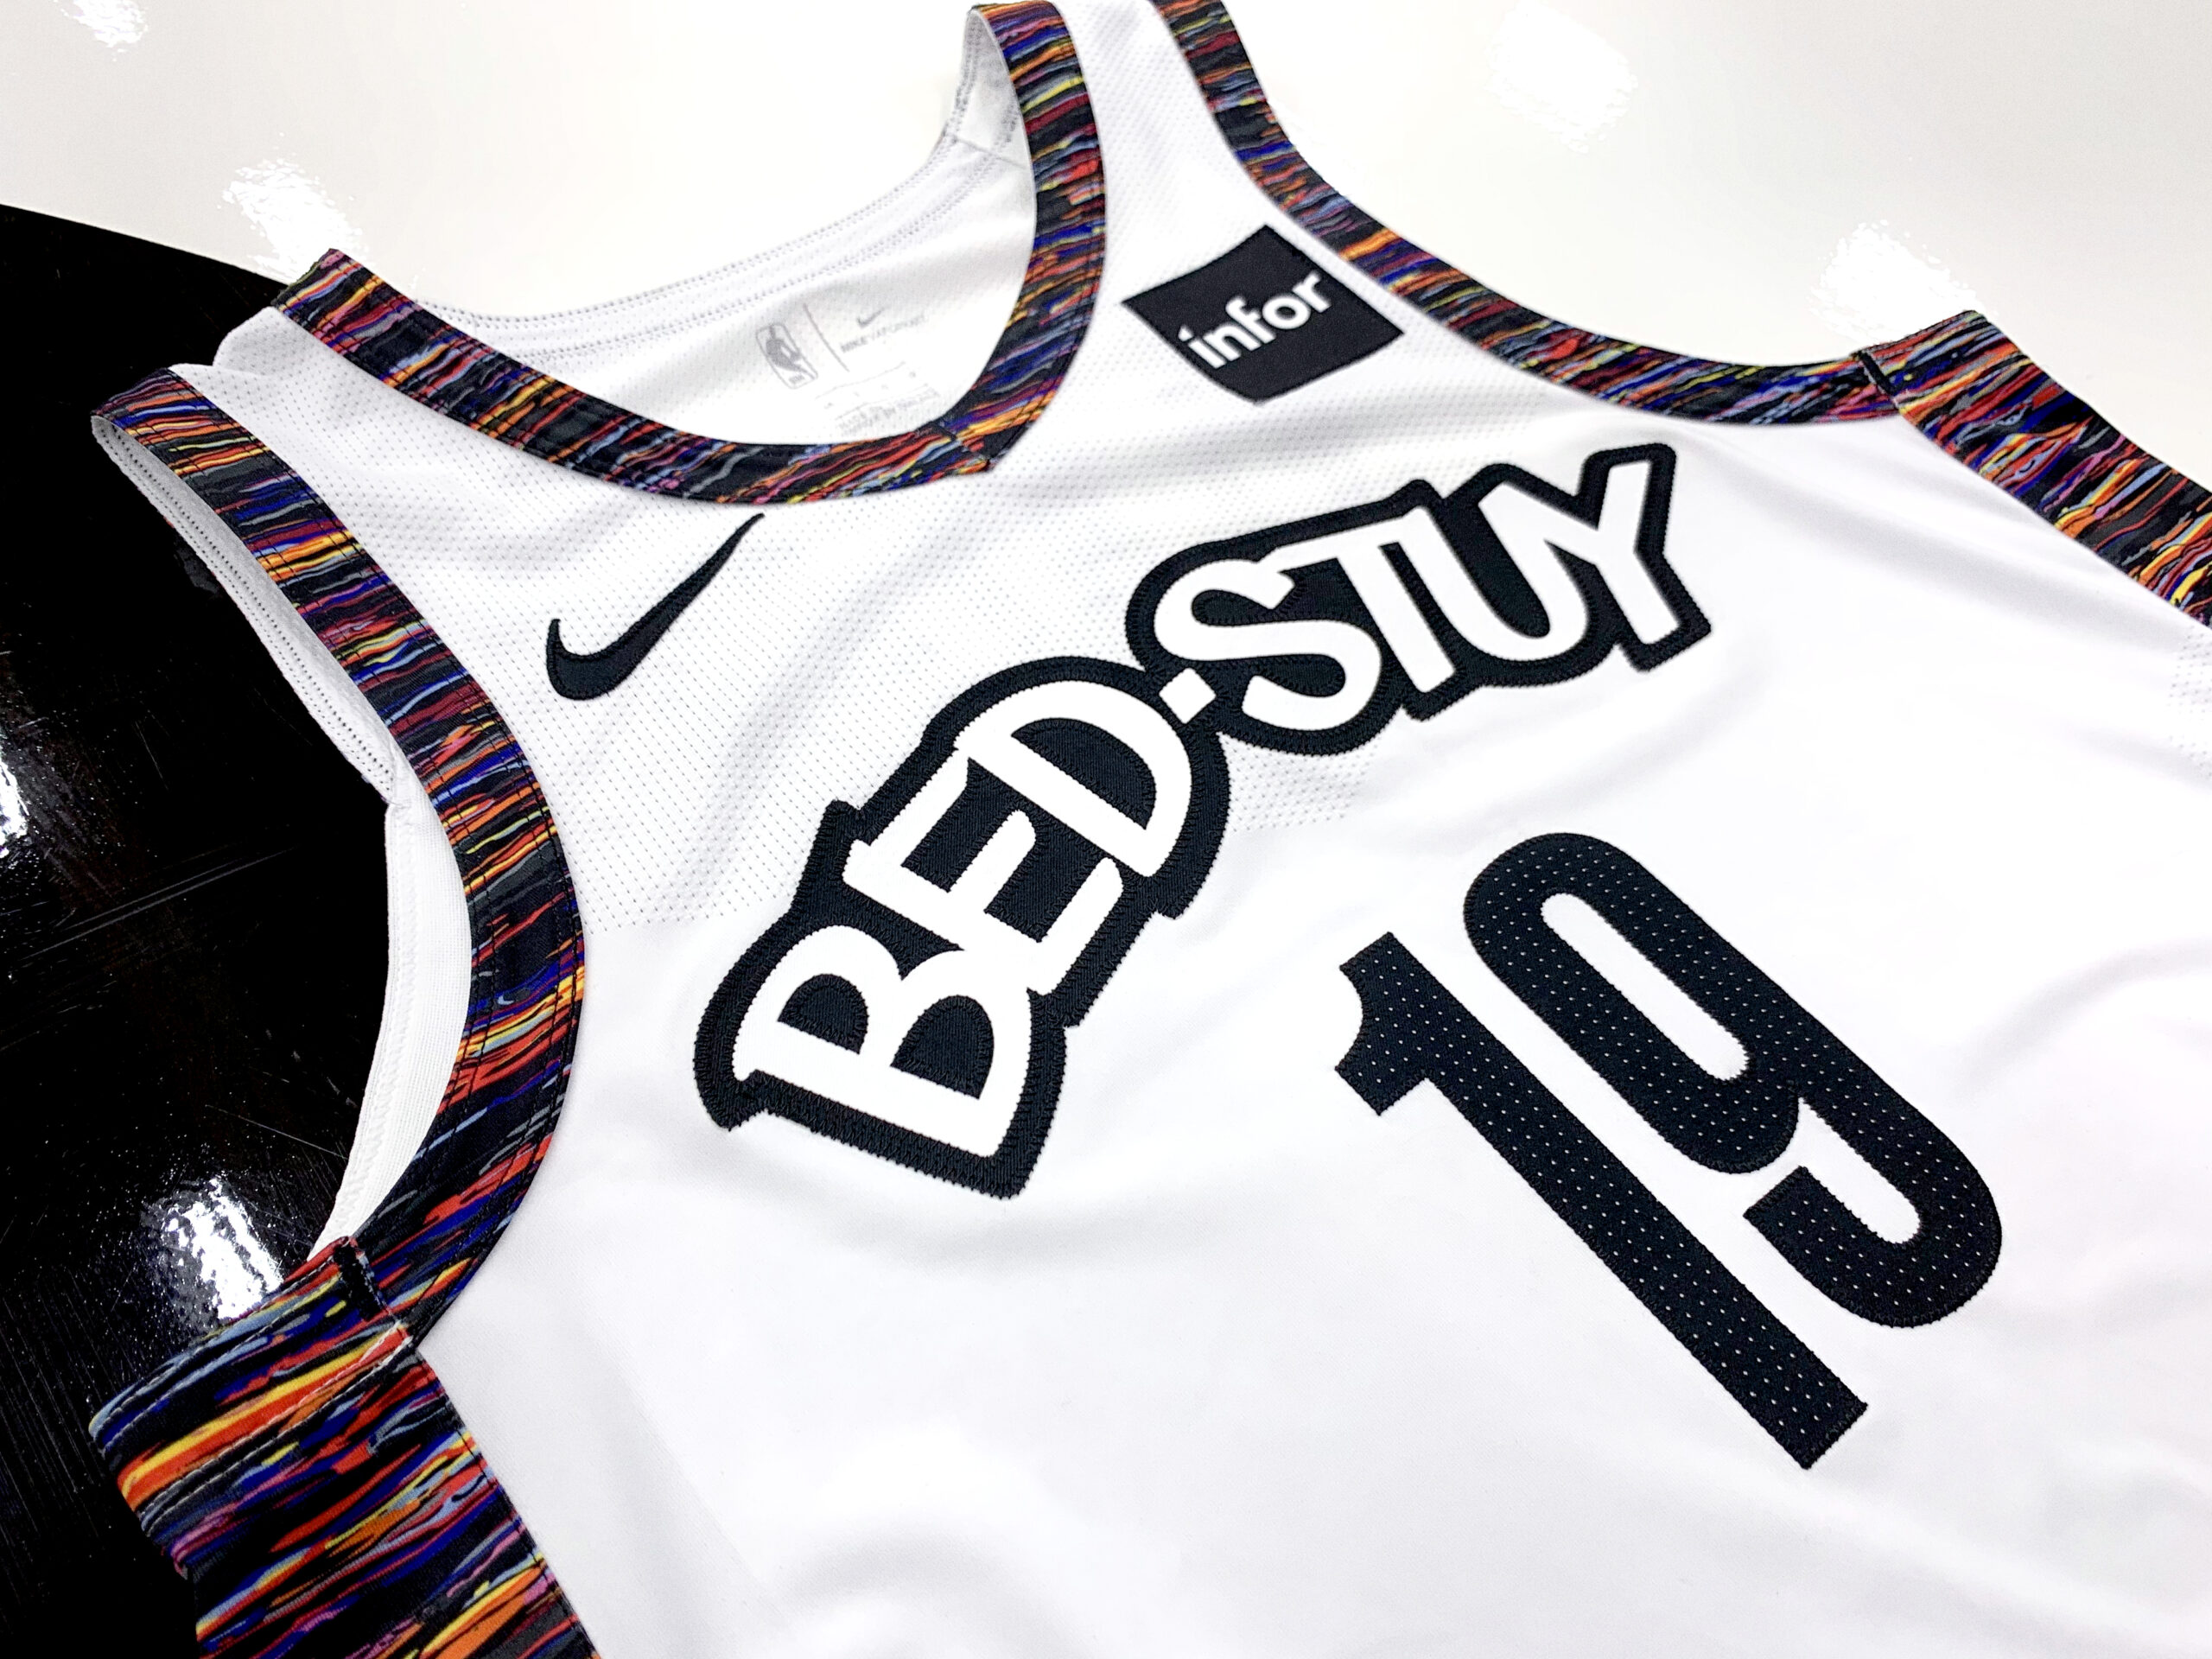 Brooklyn Nets Check Out Their Biggie-Inspired Nike City Edition Jerseys